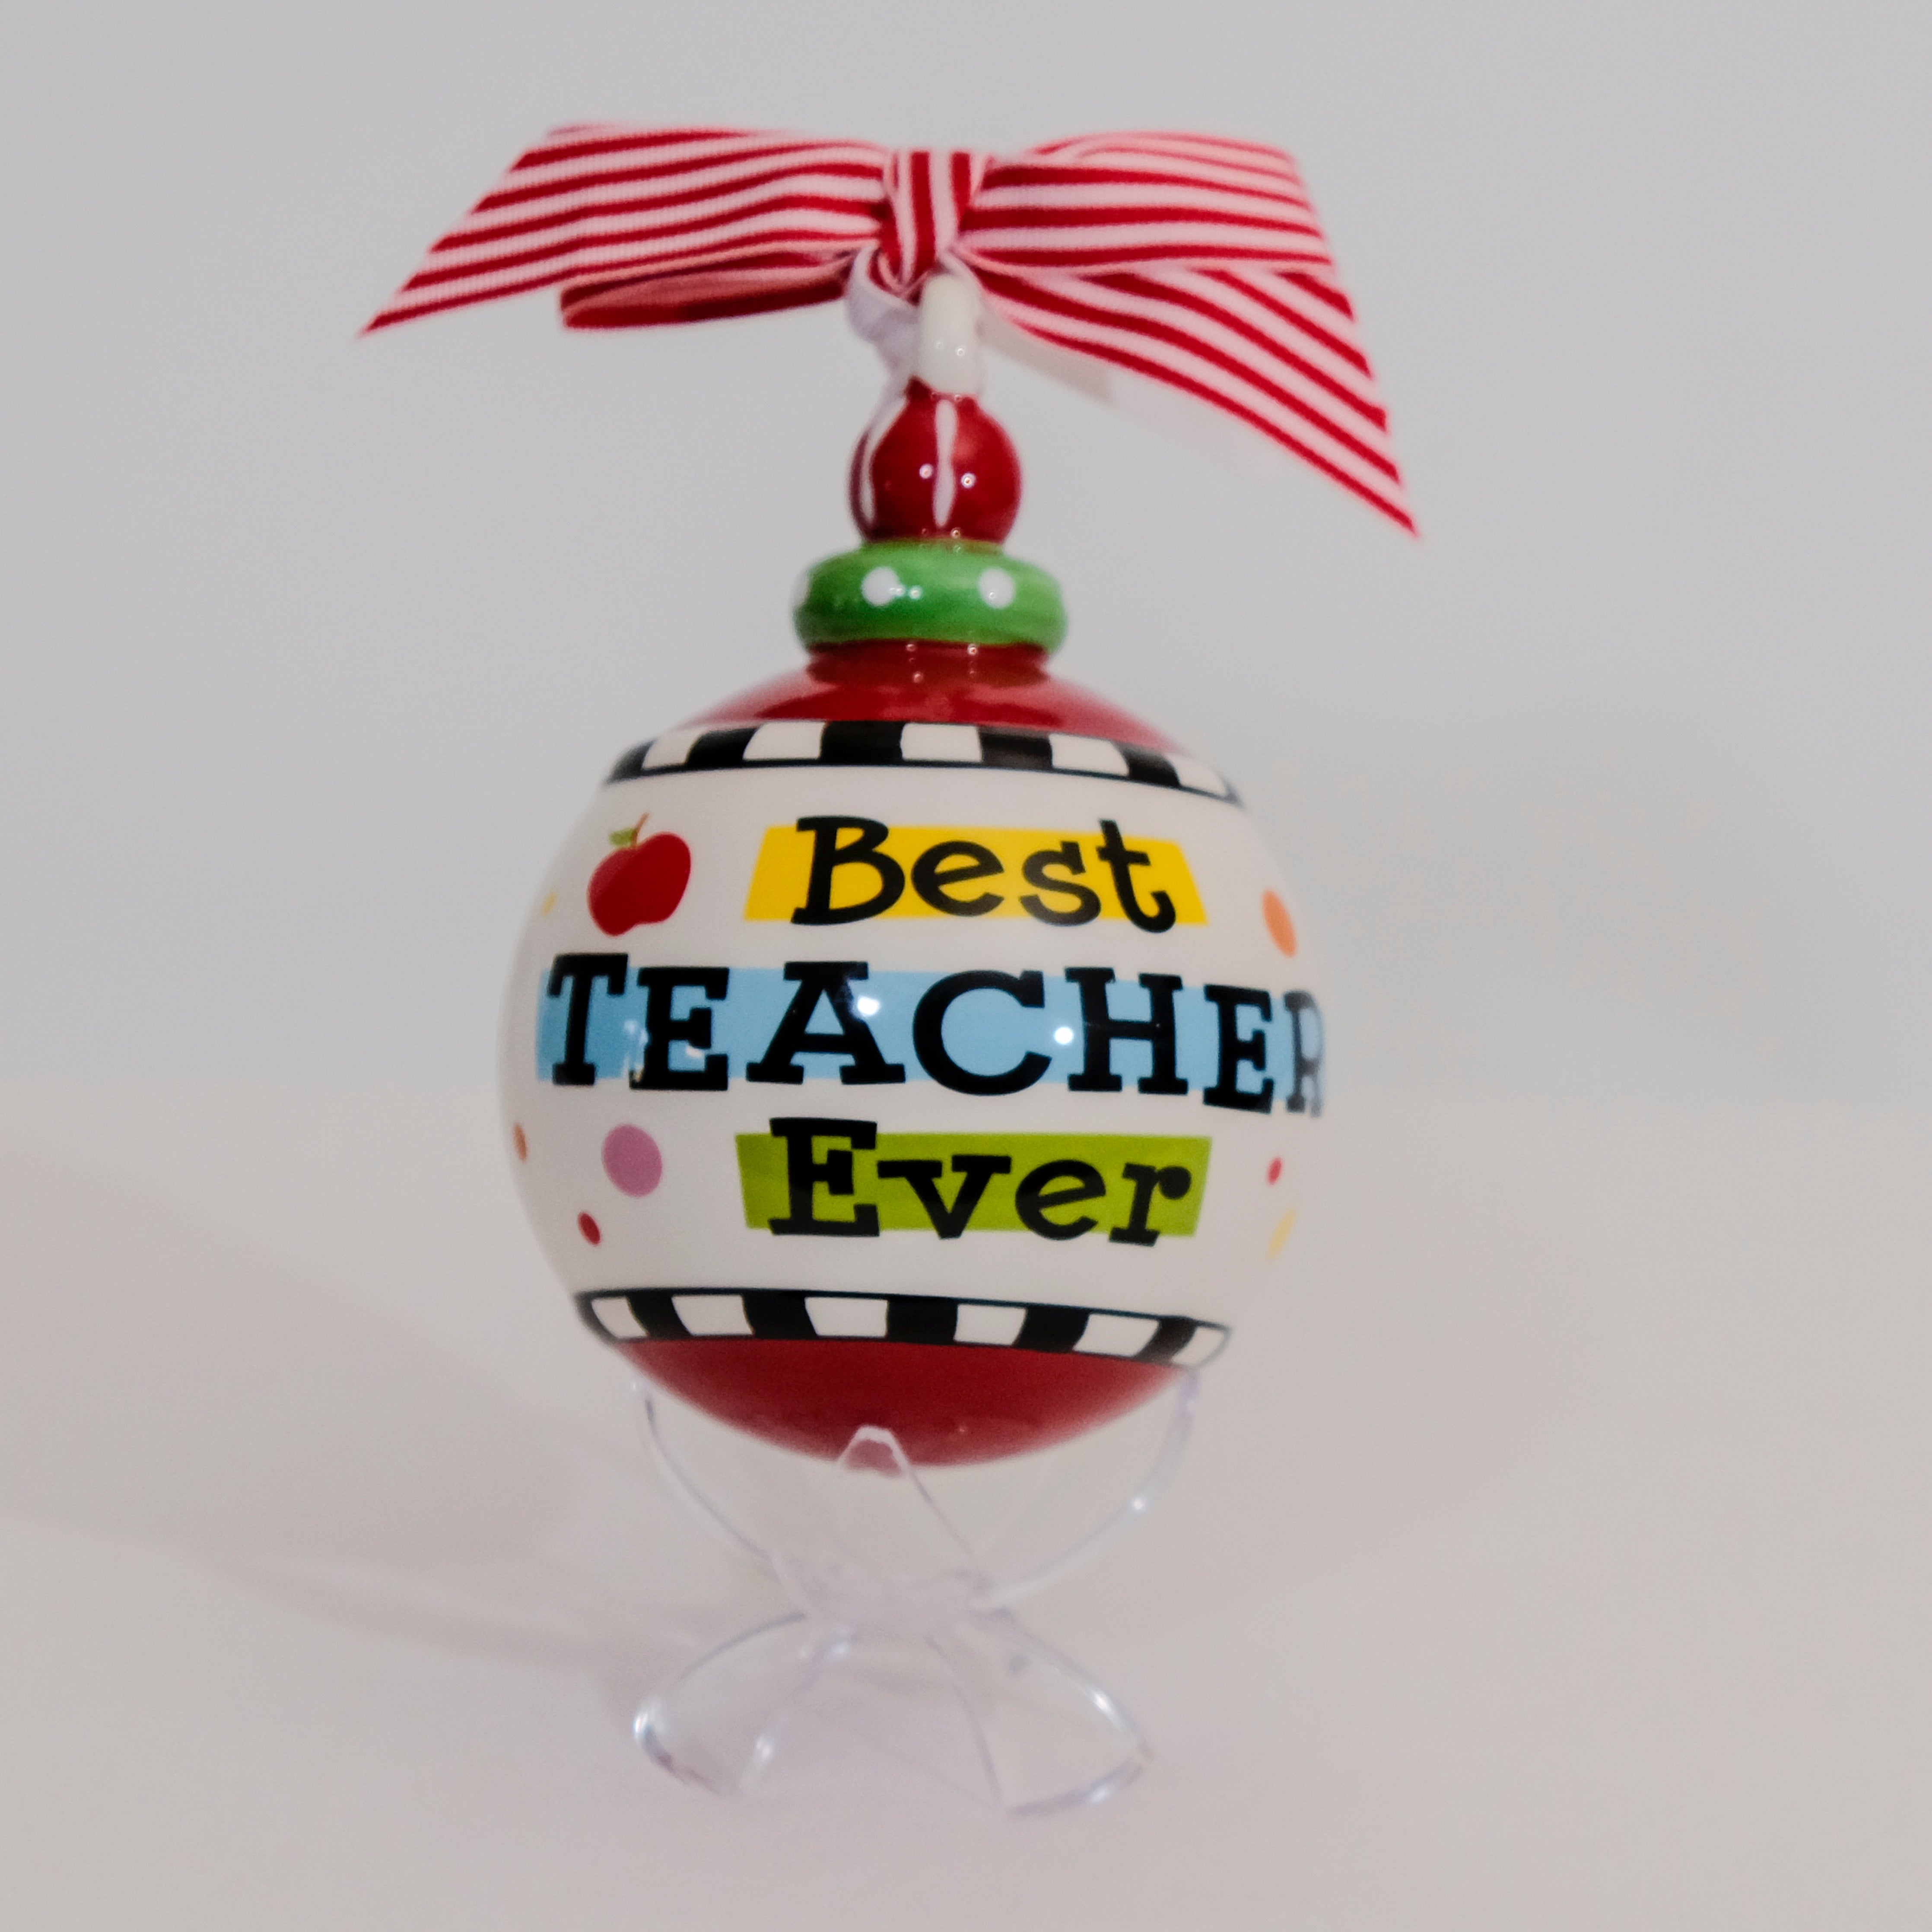 Best Teacher Ever Christmas Ornament product image features, a hand painted ceramic ornament sitting on a clear acrylic stand.  Round with red and white striped bow attached.  Slightly raised lettering in black.  Colors are red, green, yellow and light blue.  Comes with clear acrylic stand.  Hang on tree or sit on acrylic stand.